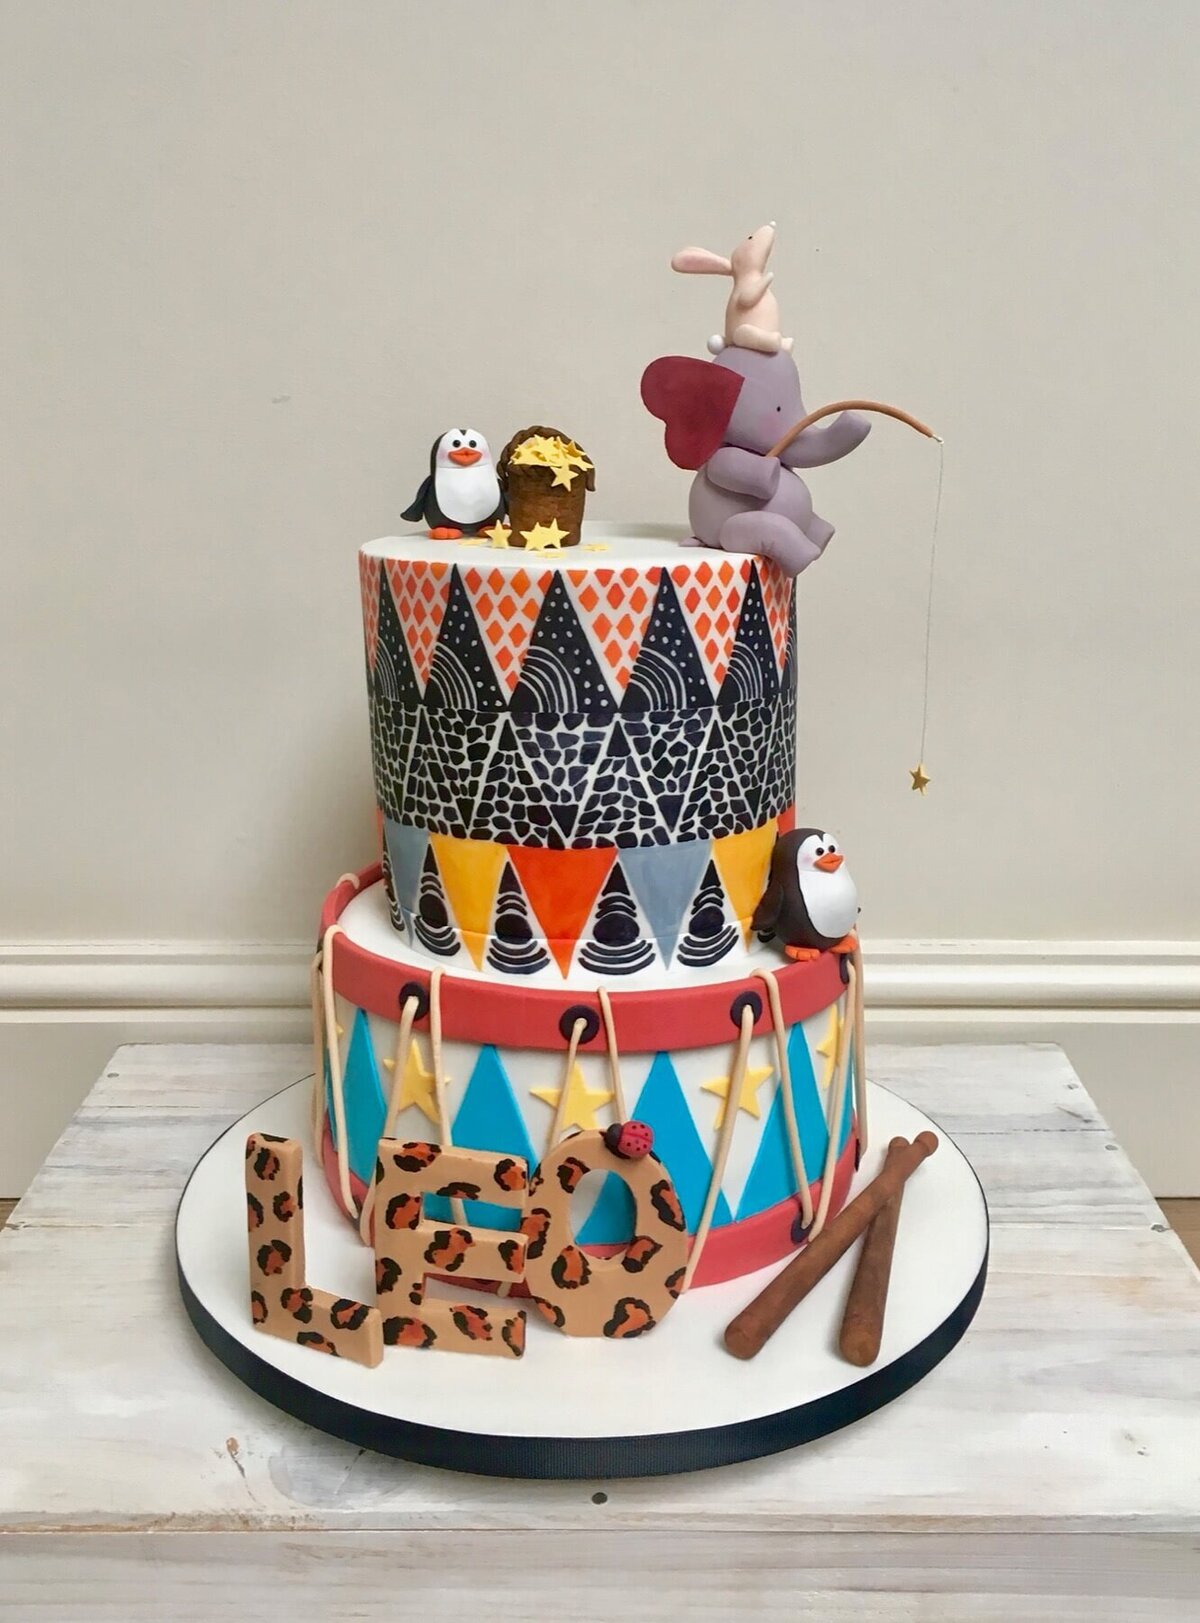 A funky birthday cake with two tiers and an elephant and mouse fishing along with 2 penguins